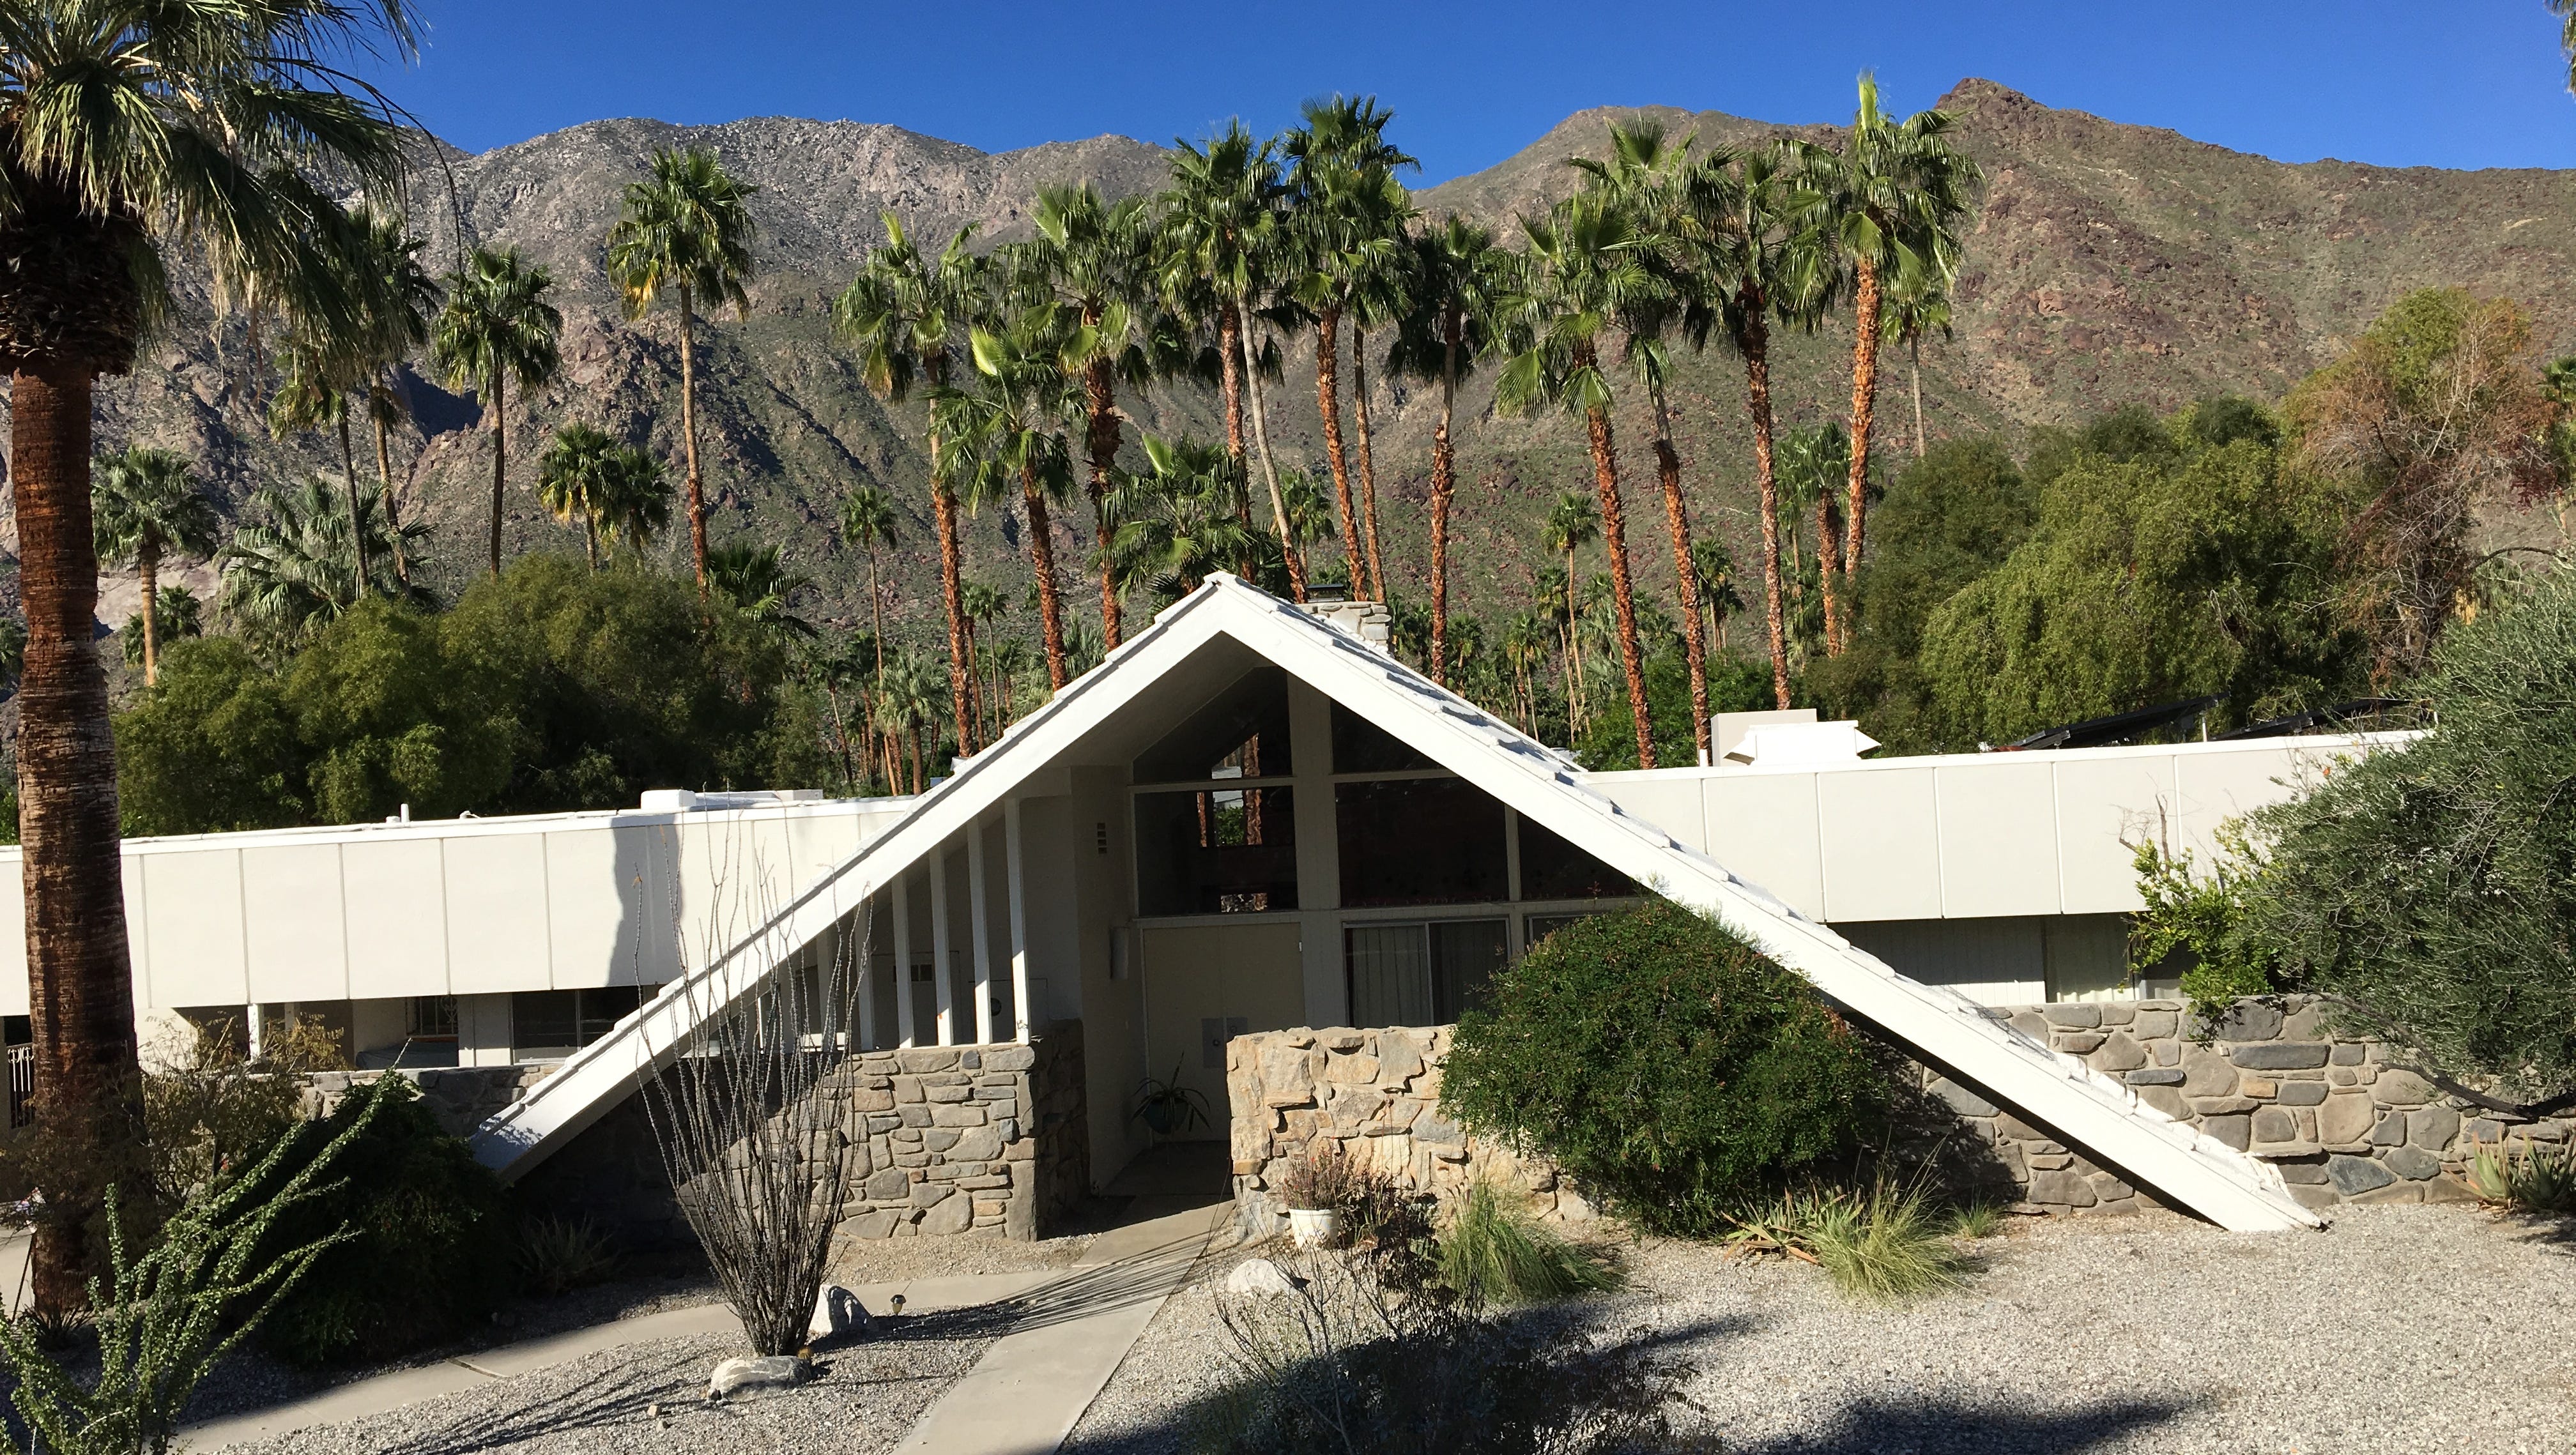 rulletrappe tobak Forenkle Want a mid-century modern home in Palm Springs? Expect to pay more.